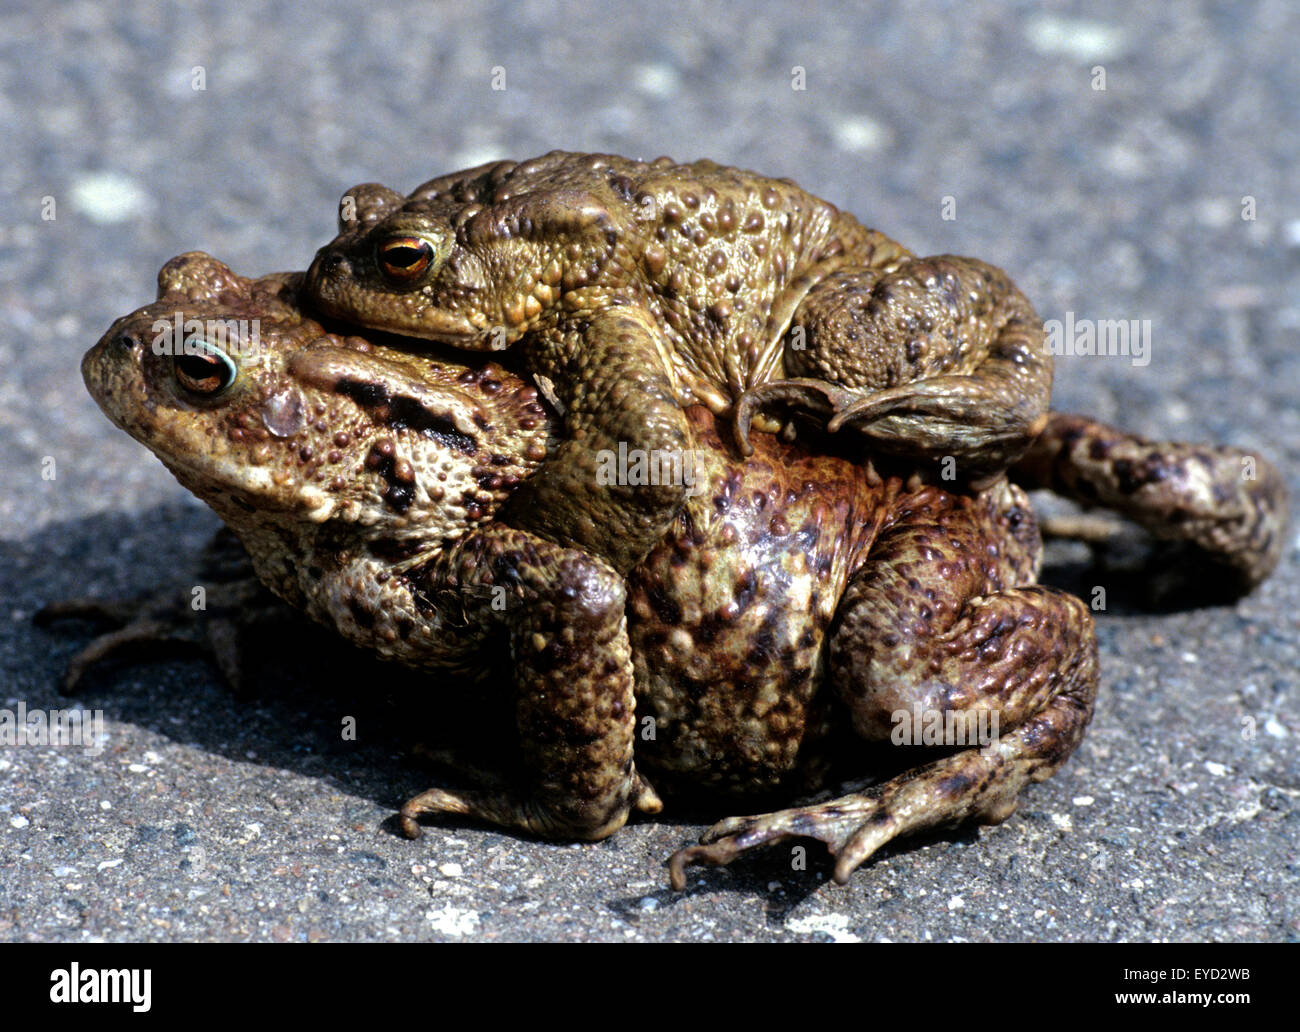 Froesche High Resolution Stock Photography and Images - Alamy